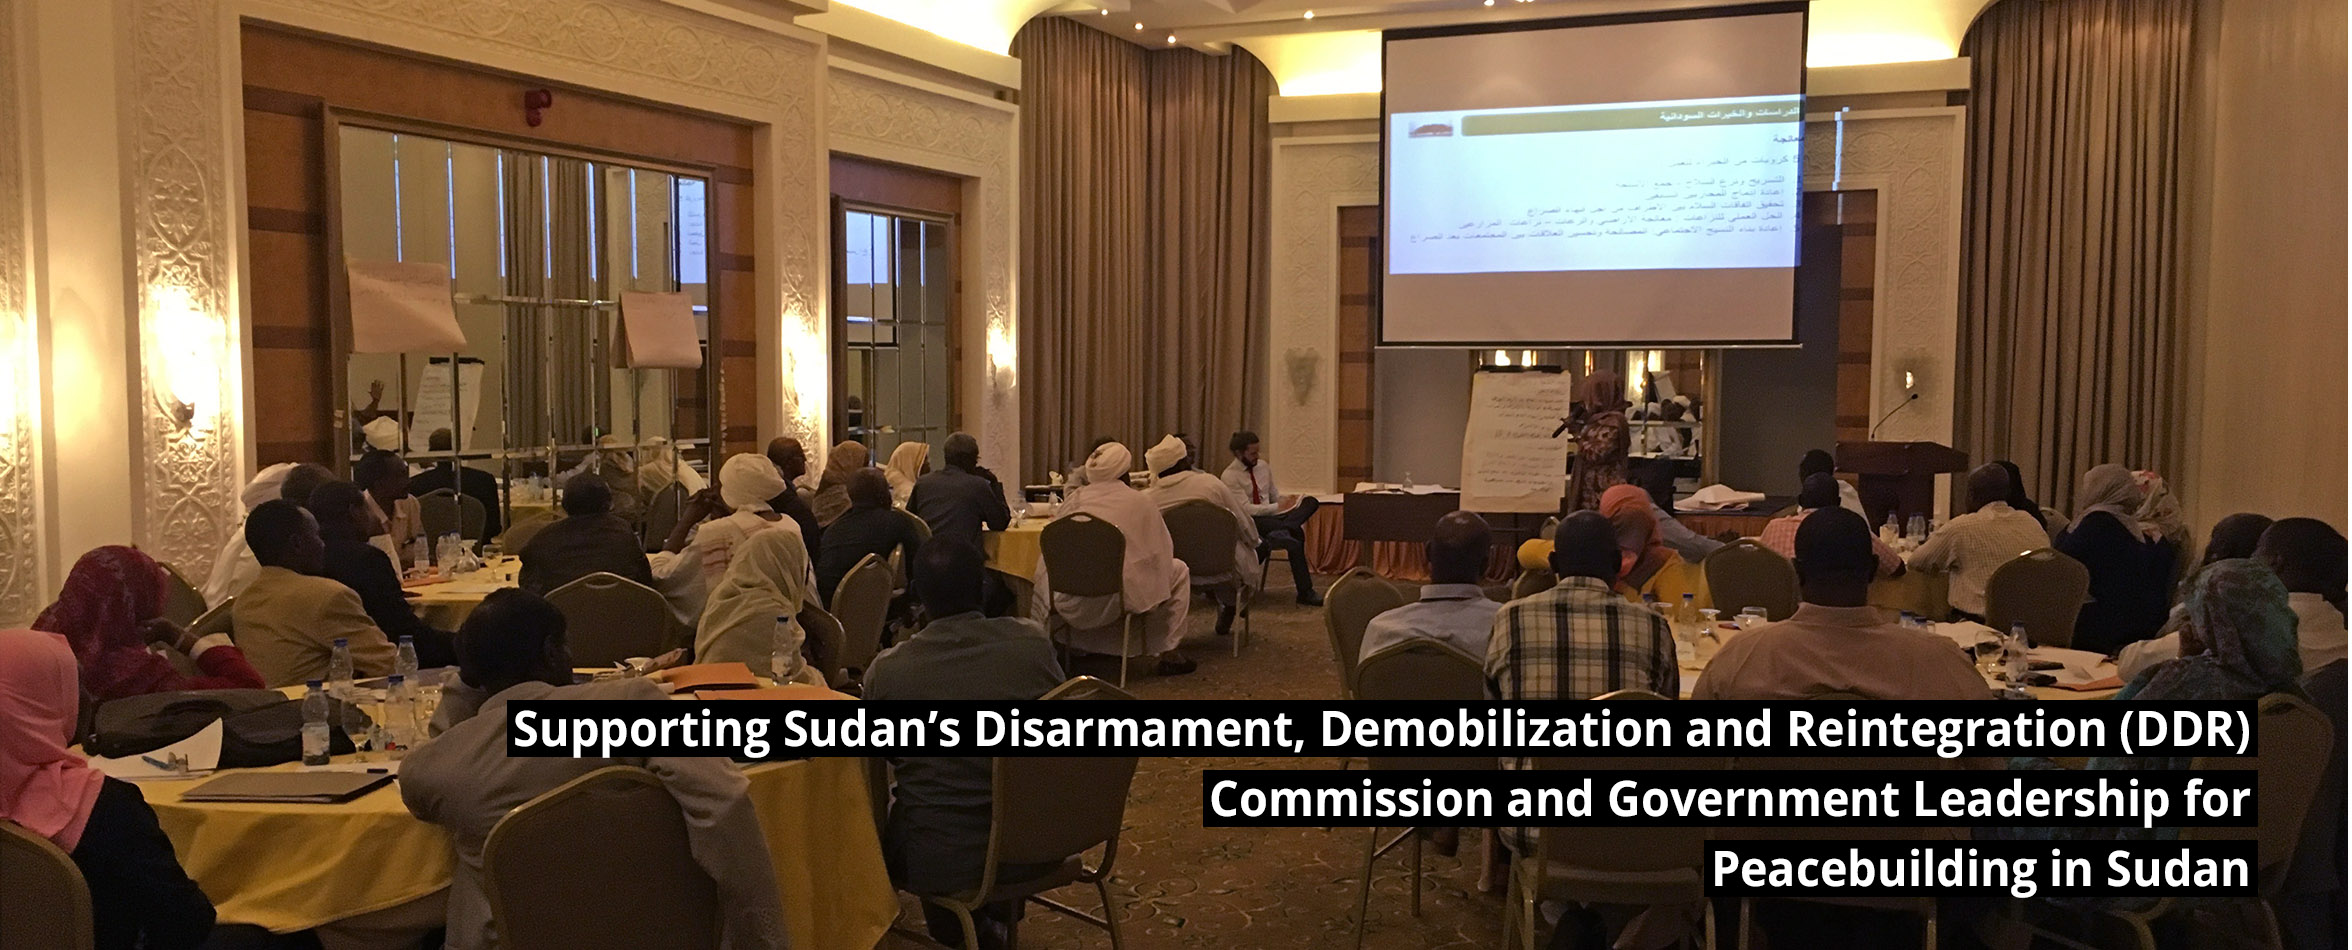 slide-7 Supporting Sudan’s Disarmament, Demobilization and Reintegration (DDR) Commission and Government Leadership for Peacebuilding in Sudan